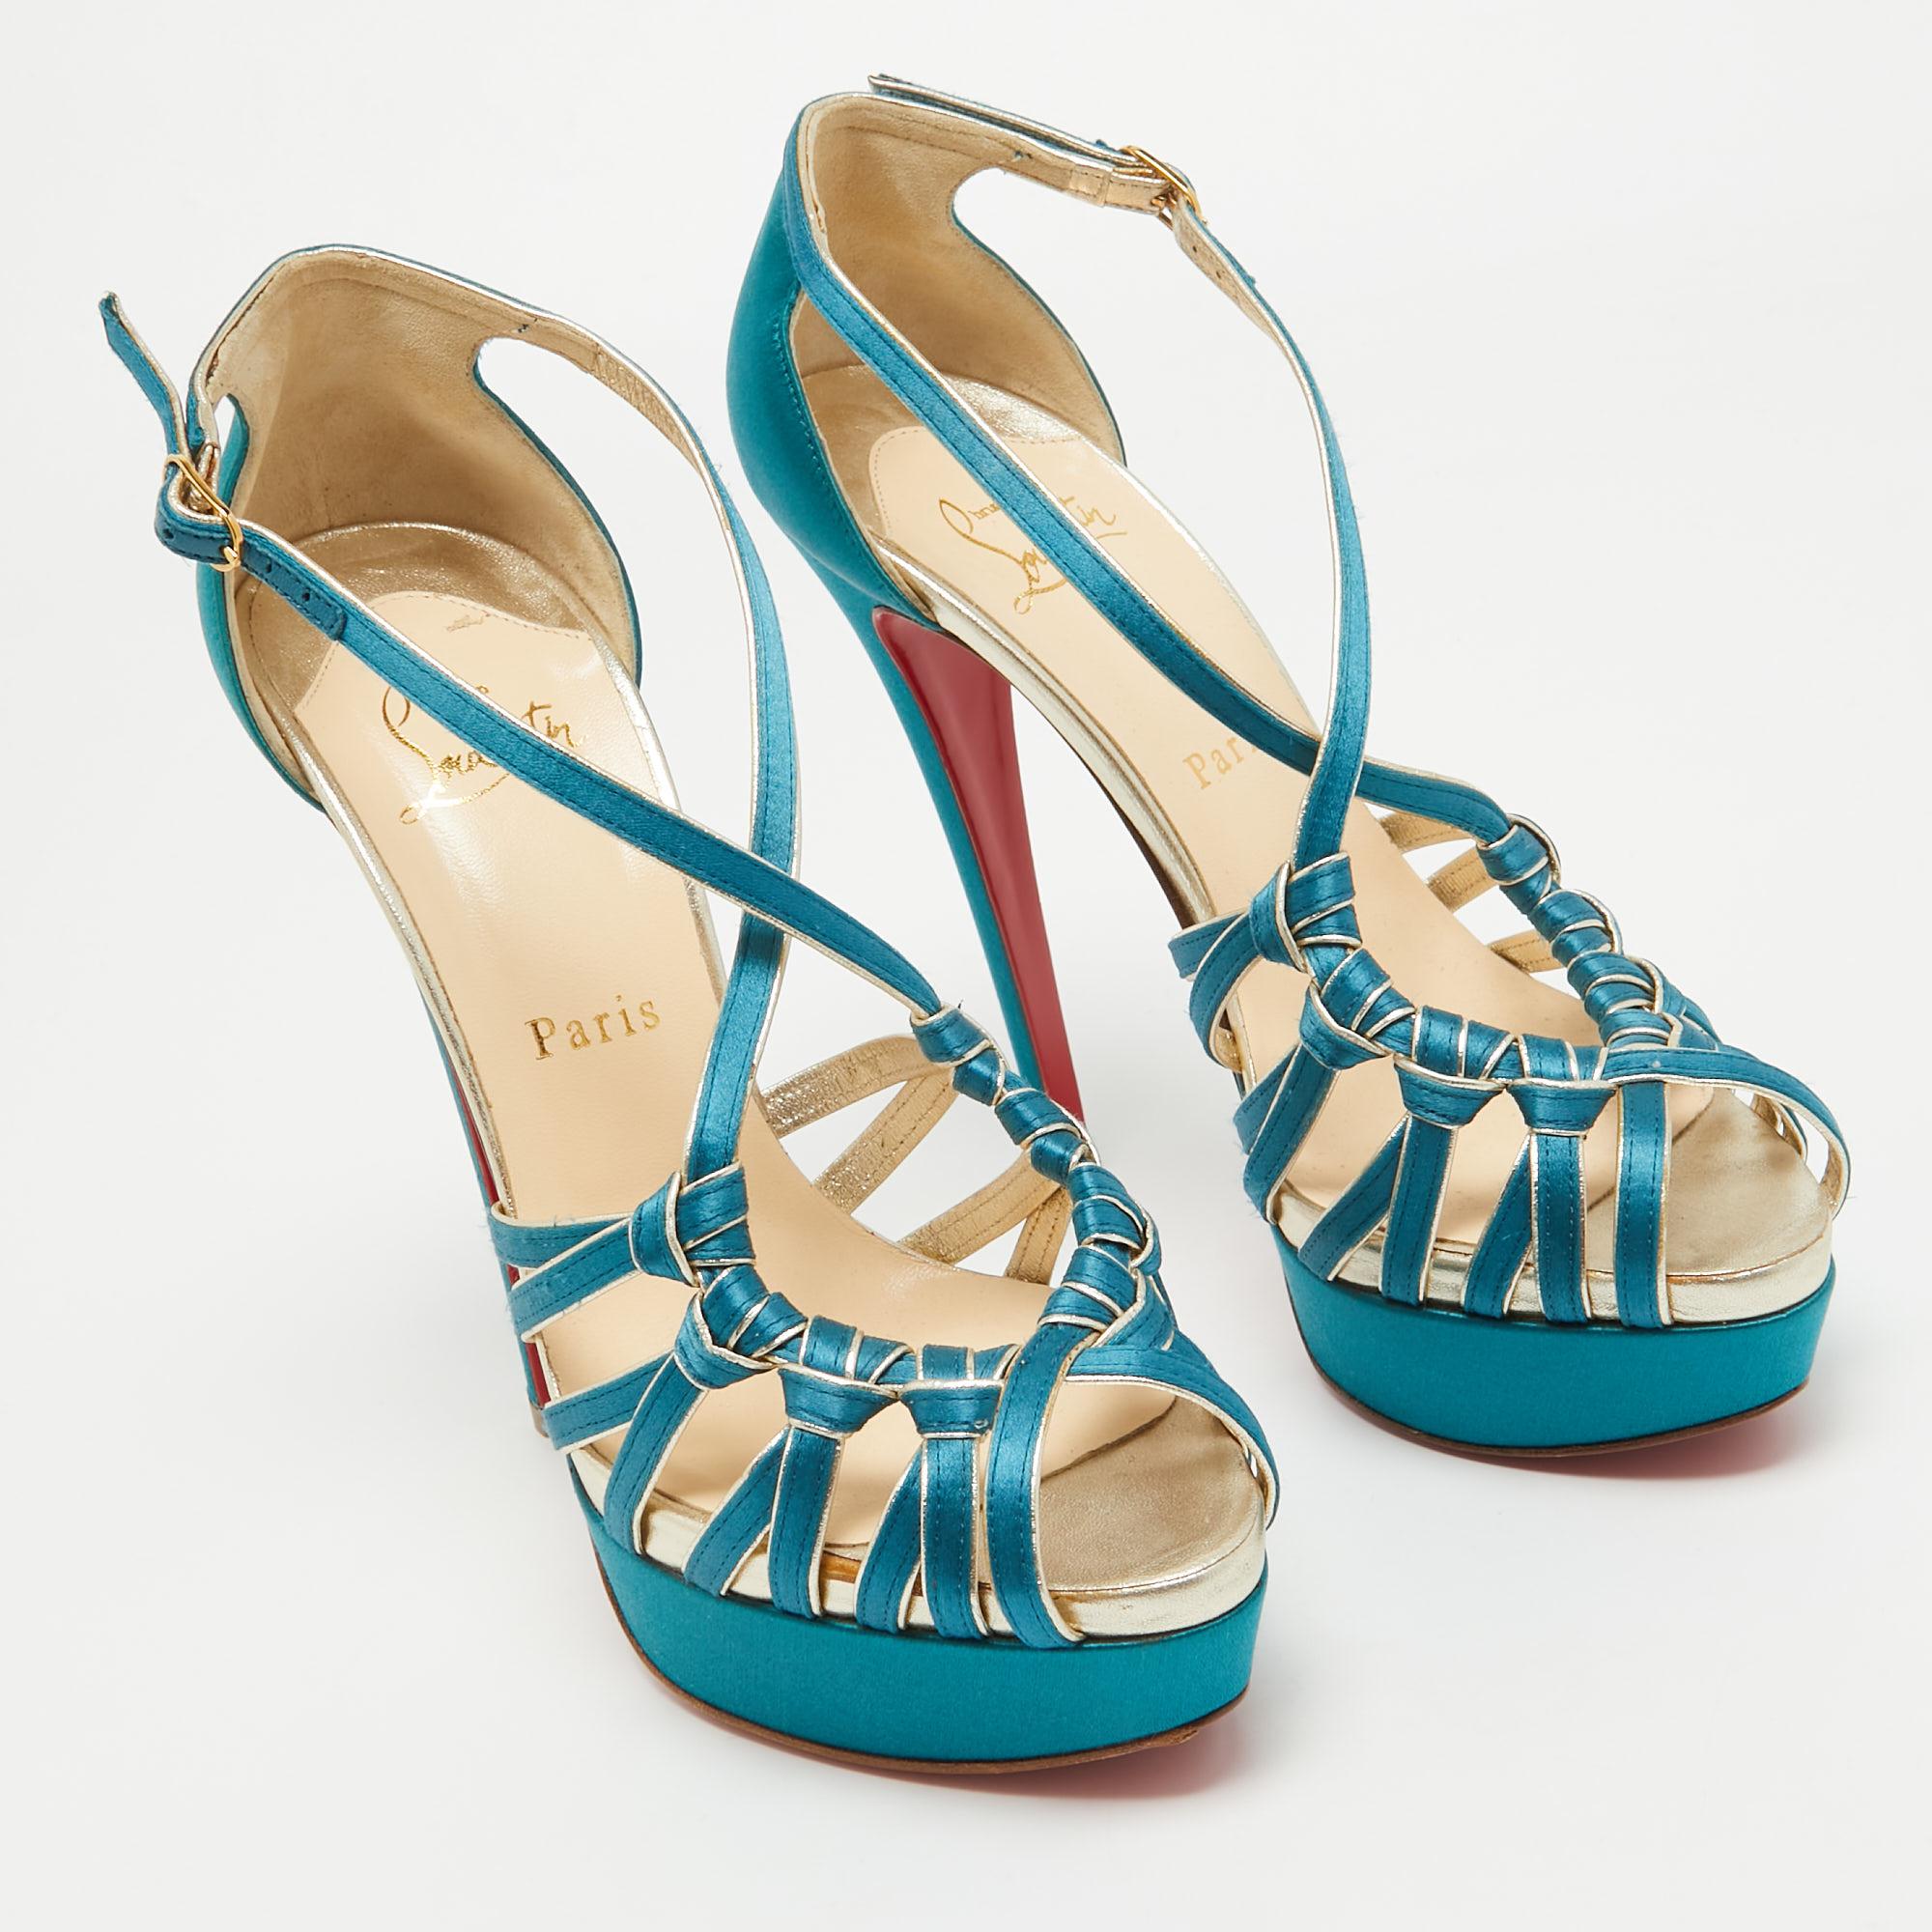 Christian Louboutin Teal Satin Knotted Strappy Platform Sandals Size 39 In New Condition For Sale In Dubai, Al Qouz 2